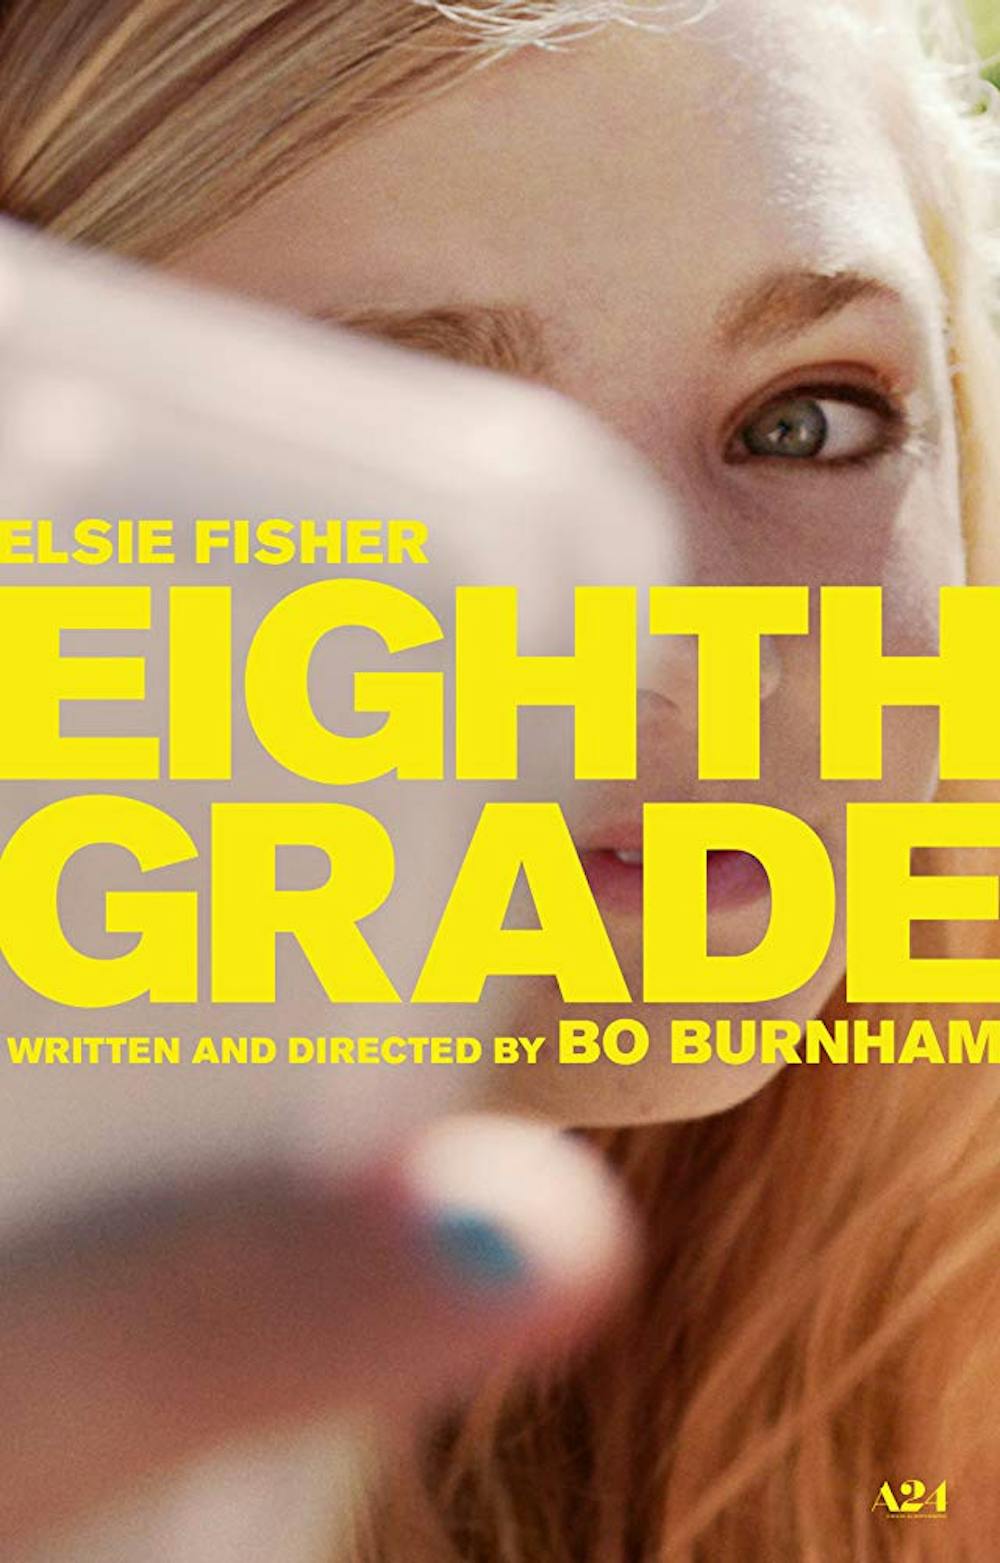 <span class="photocreditinline">A24</span><br />Bo Burnham's directorial debut was chosen by the National Board of Review and the American Film Institute as one of 2018's Top 10 Films.